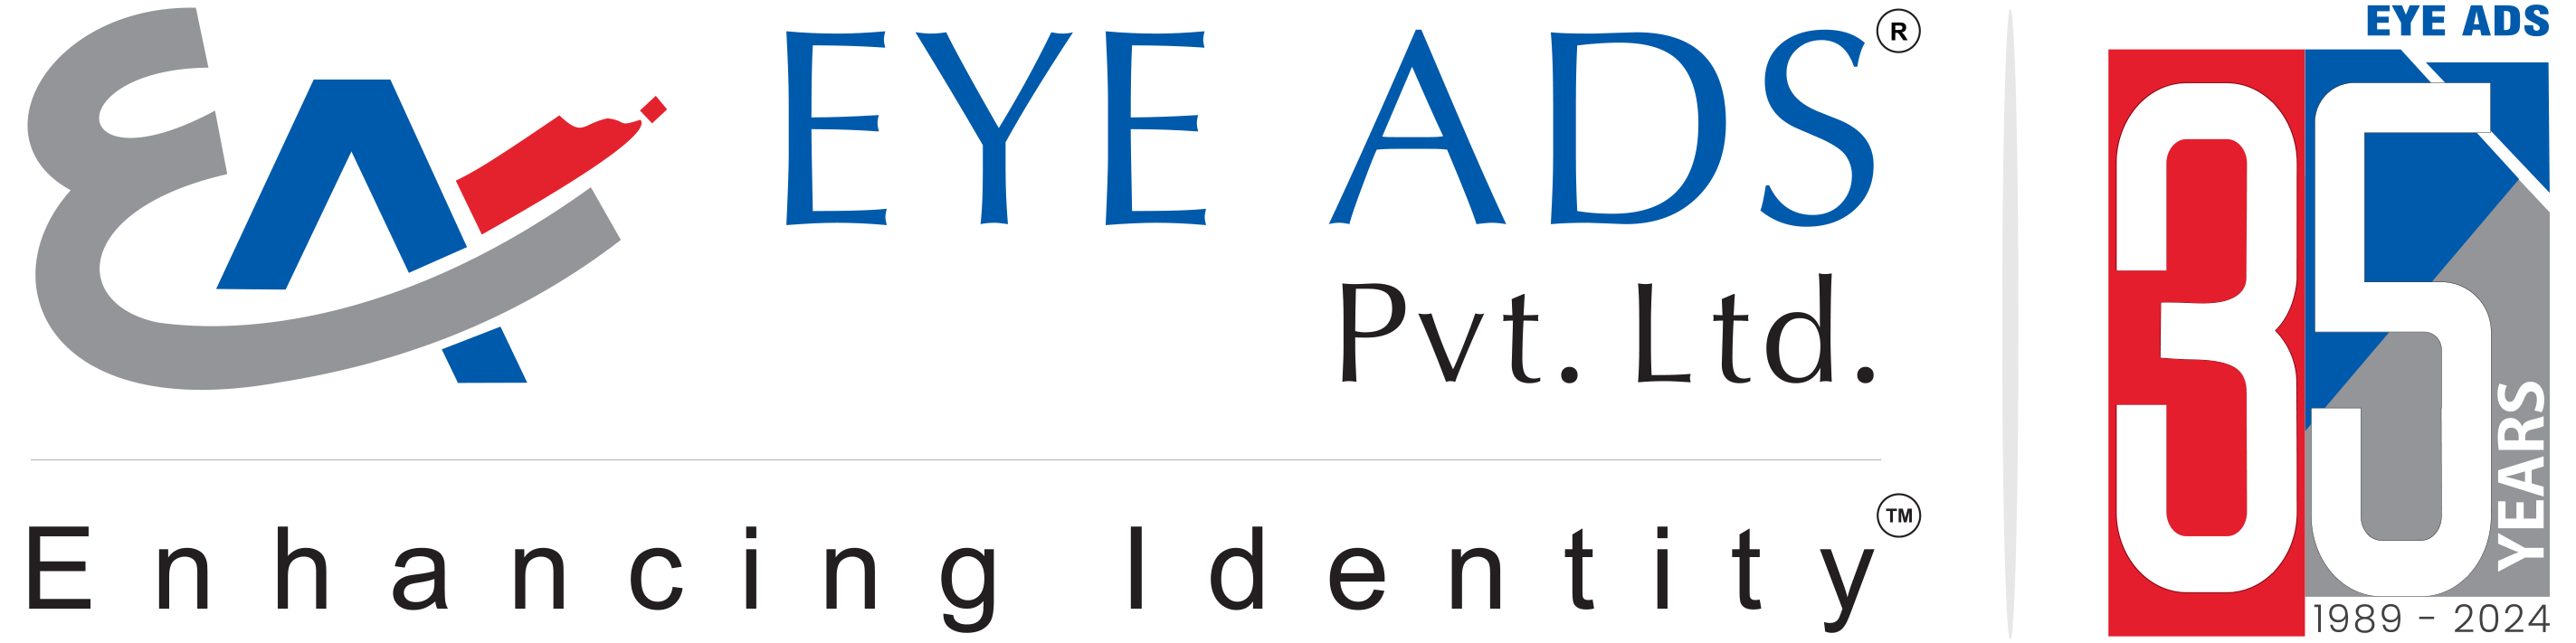 Eye Ads Private Limited – Enhancing Identity